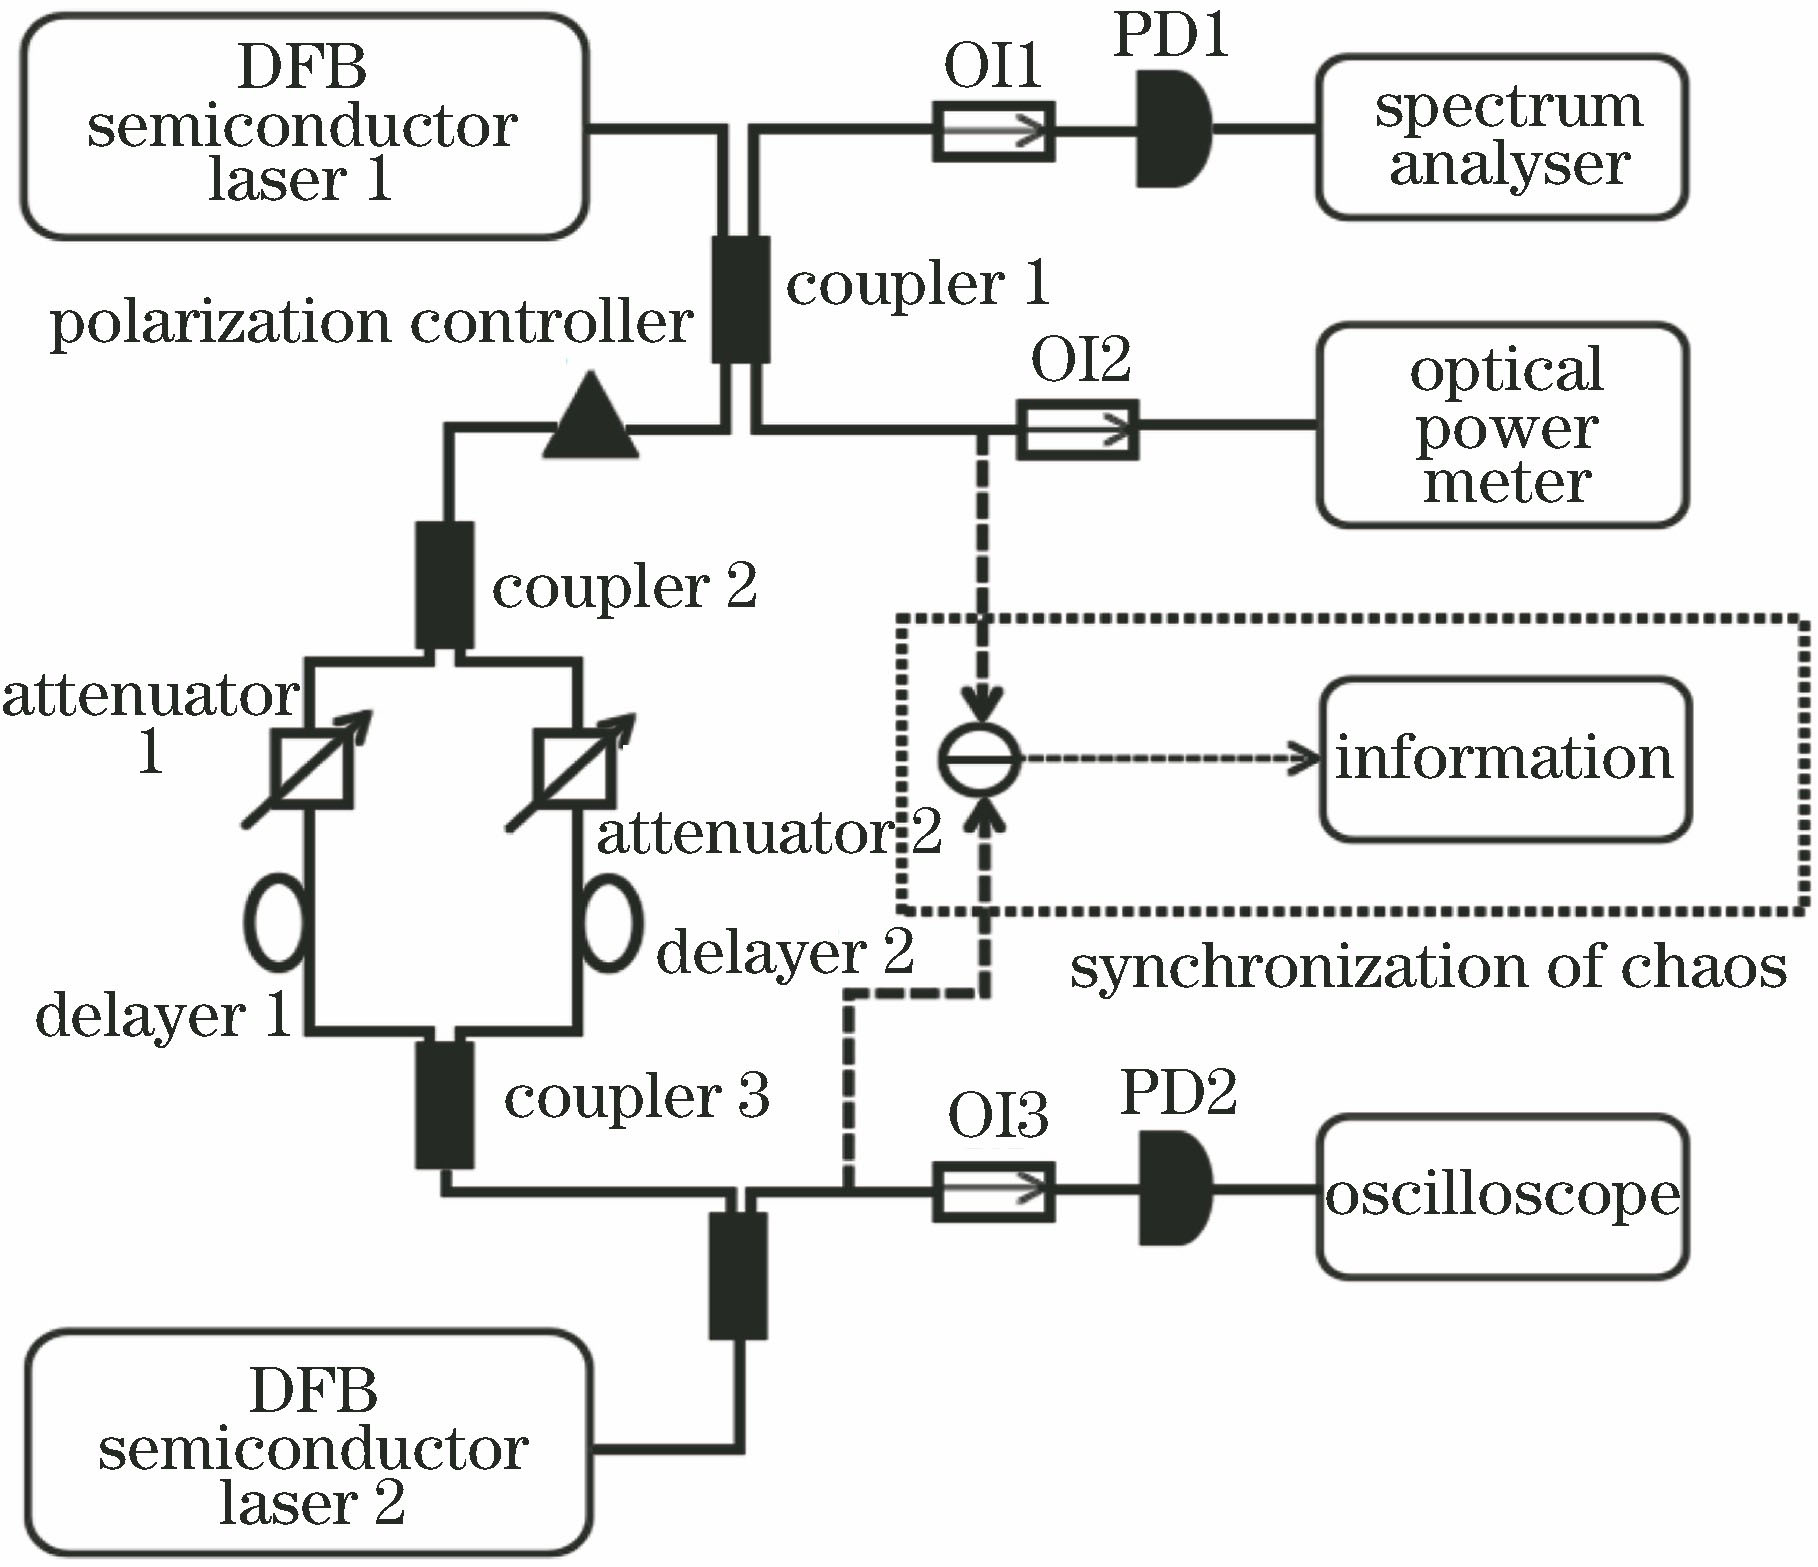 Model of chaos synchronization communication based on dual-path mutual coupling DFB semiconductor laser